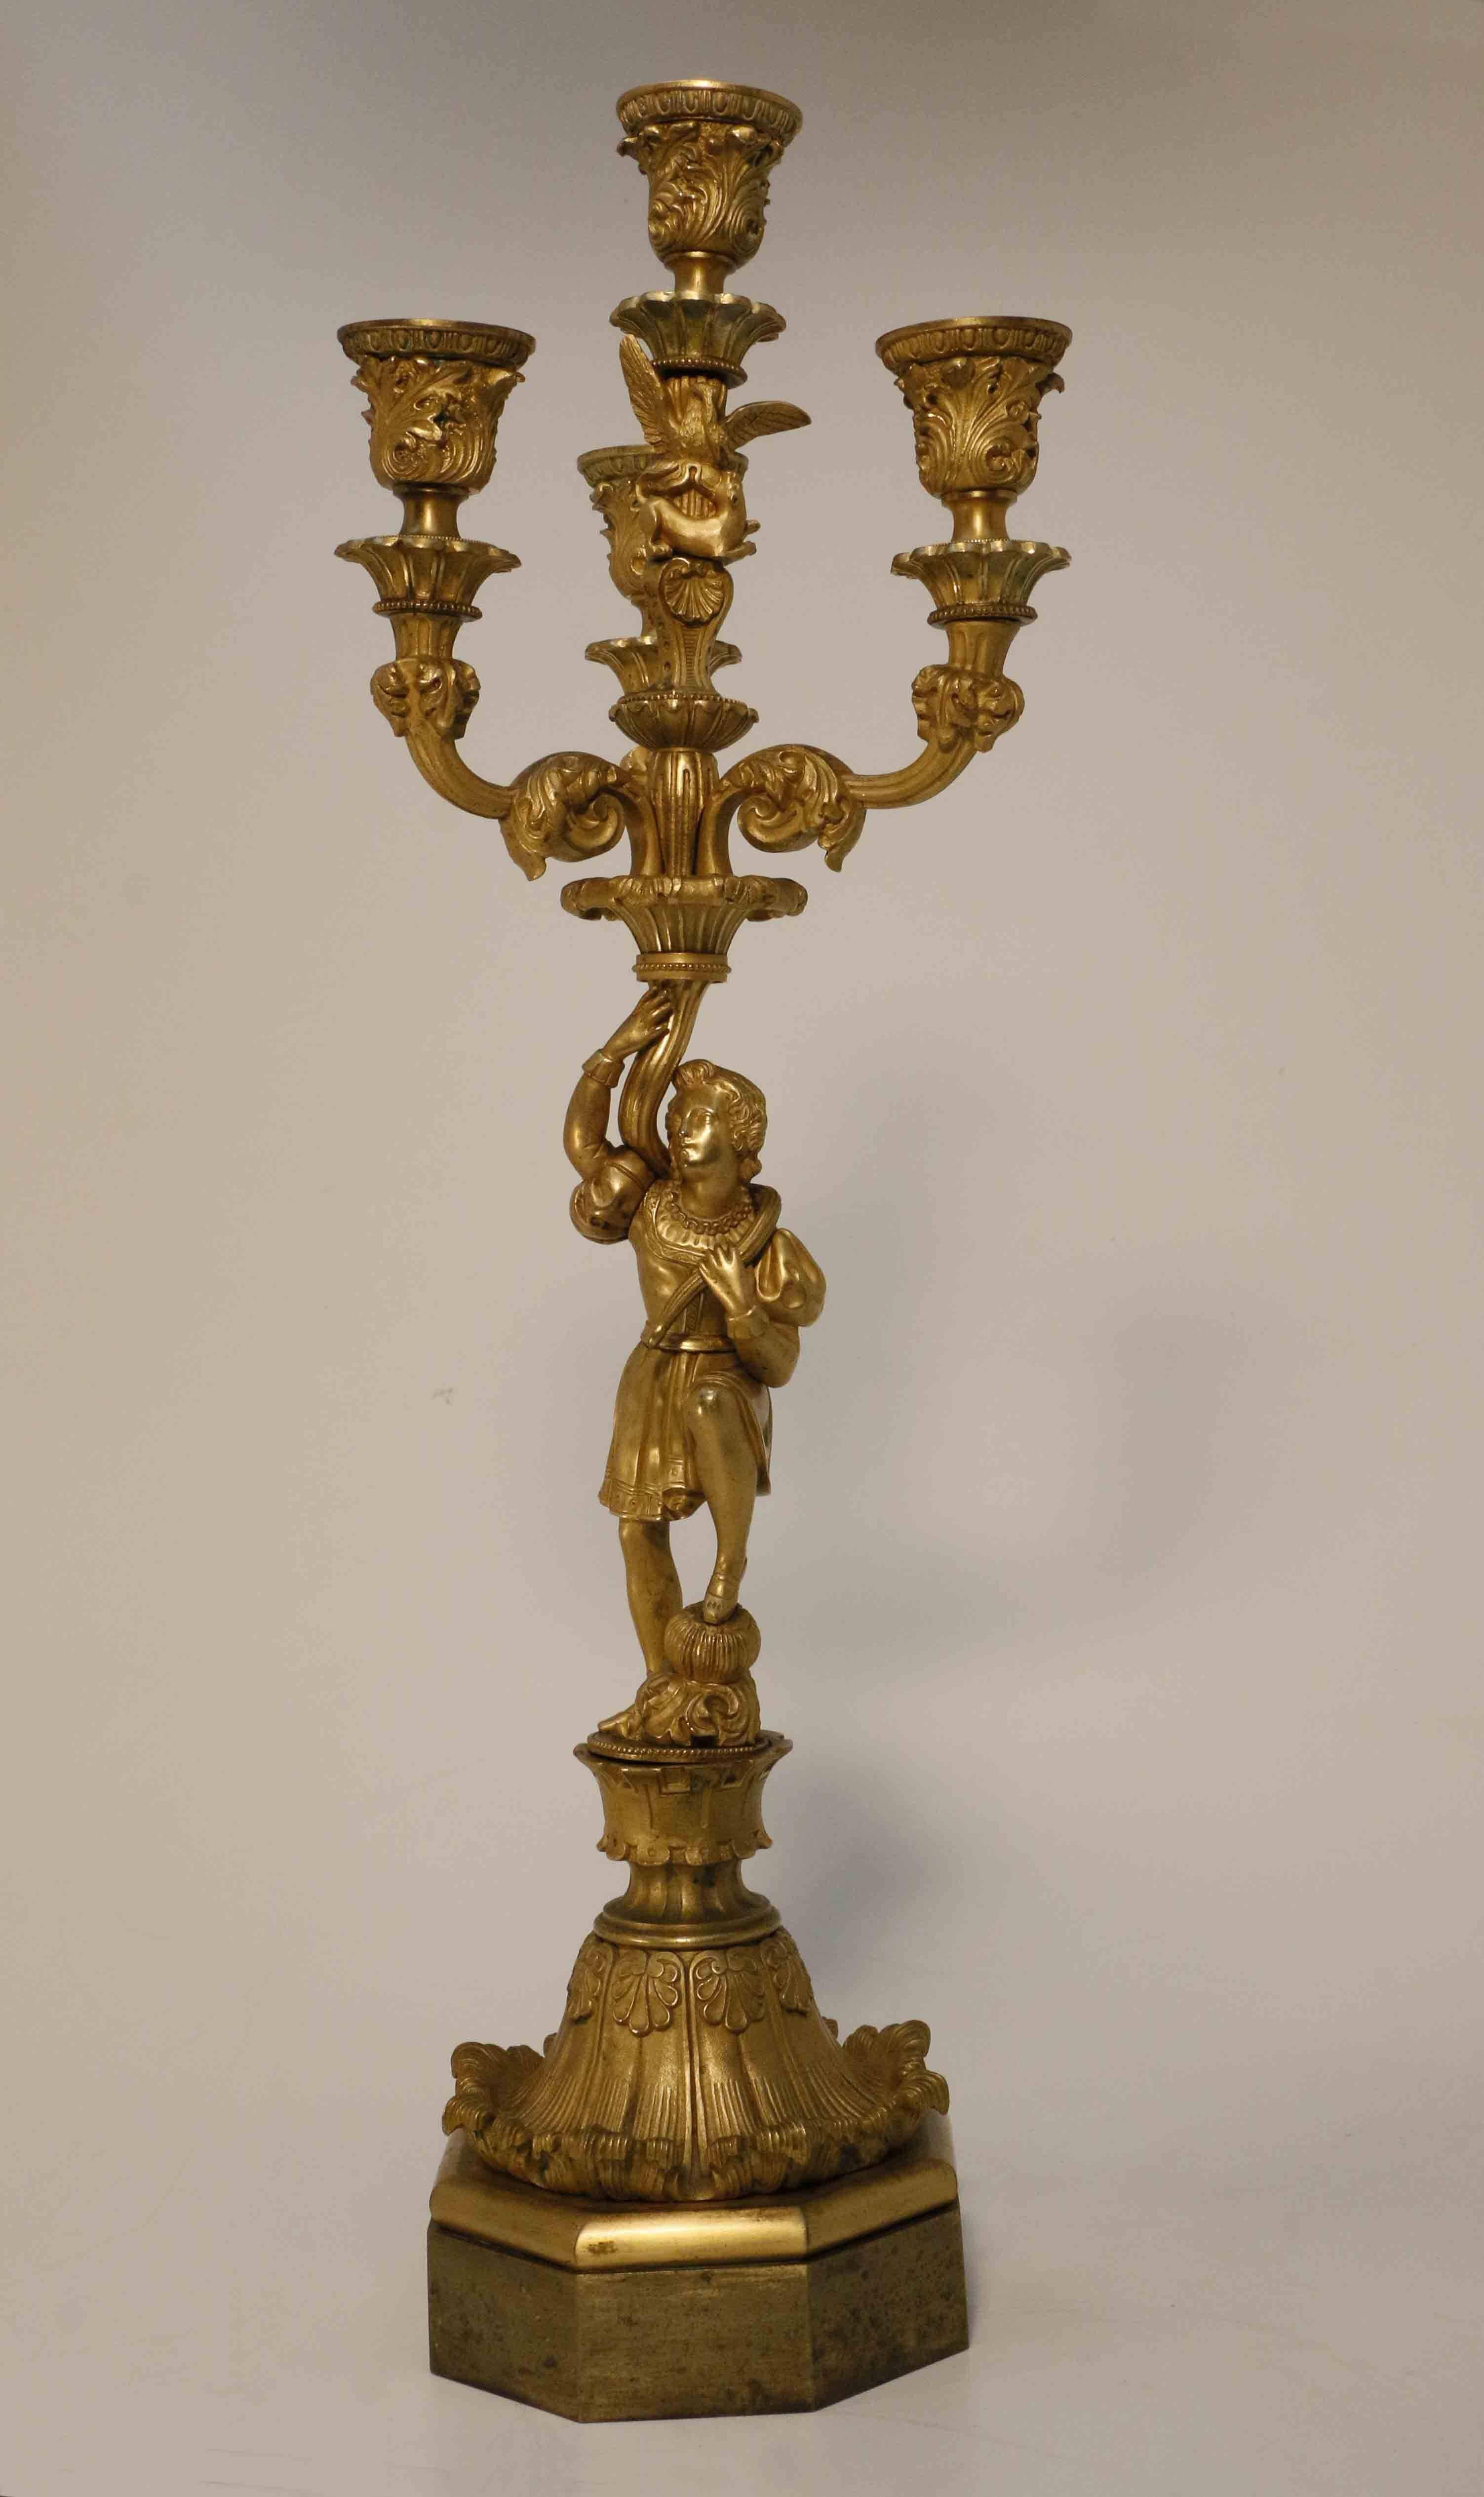 Each well modeled as a youth in Renaissance dress, one foot upon a gourd and supporting a four-light candelabrum, the arms cast with acanthus, the stem cast with a bird and wildcat, the hexagonal base is surmounted by an everted rim of stylized